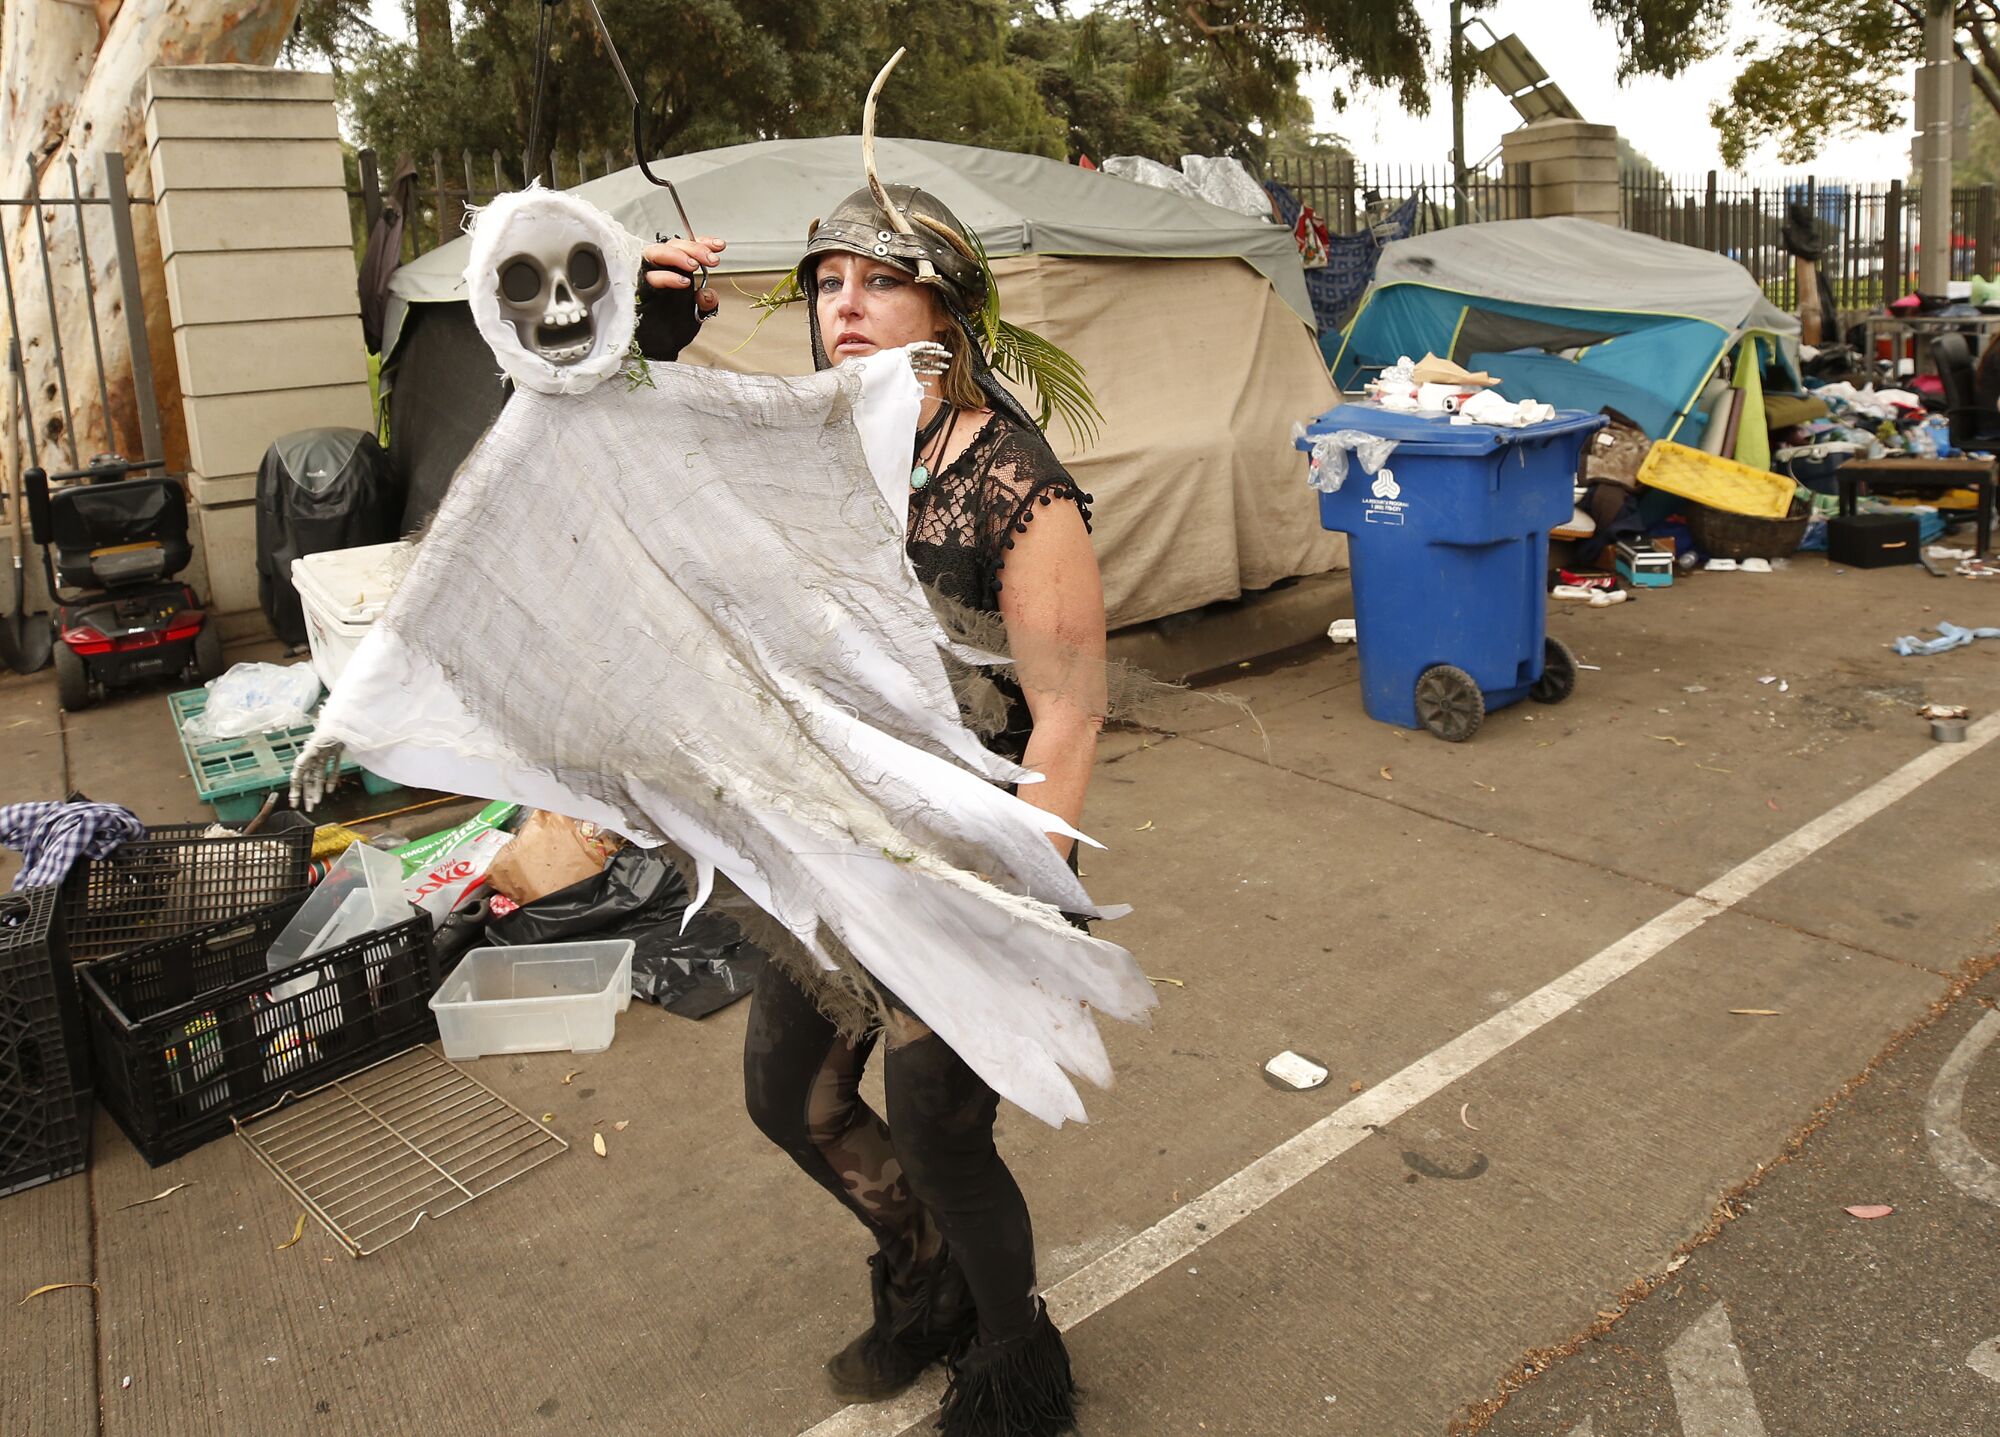 A woman in a helmet carried a Halloween decoration with a skeleton face and cloth body